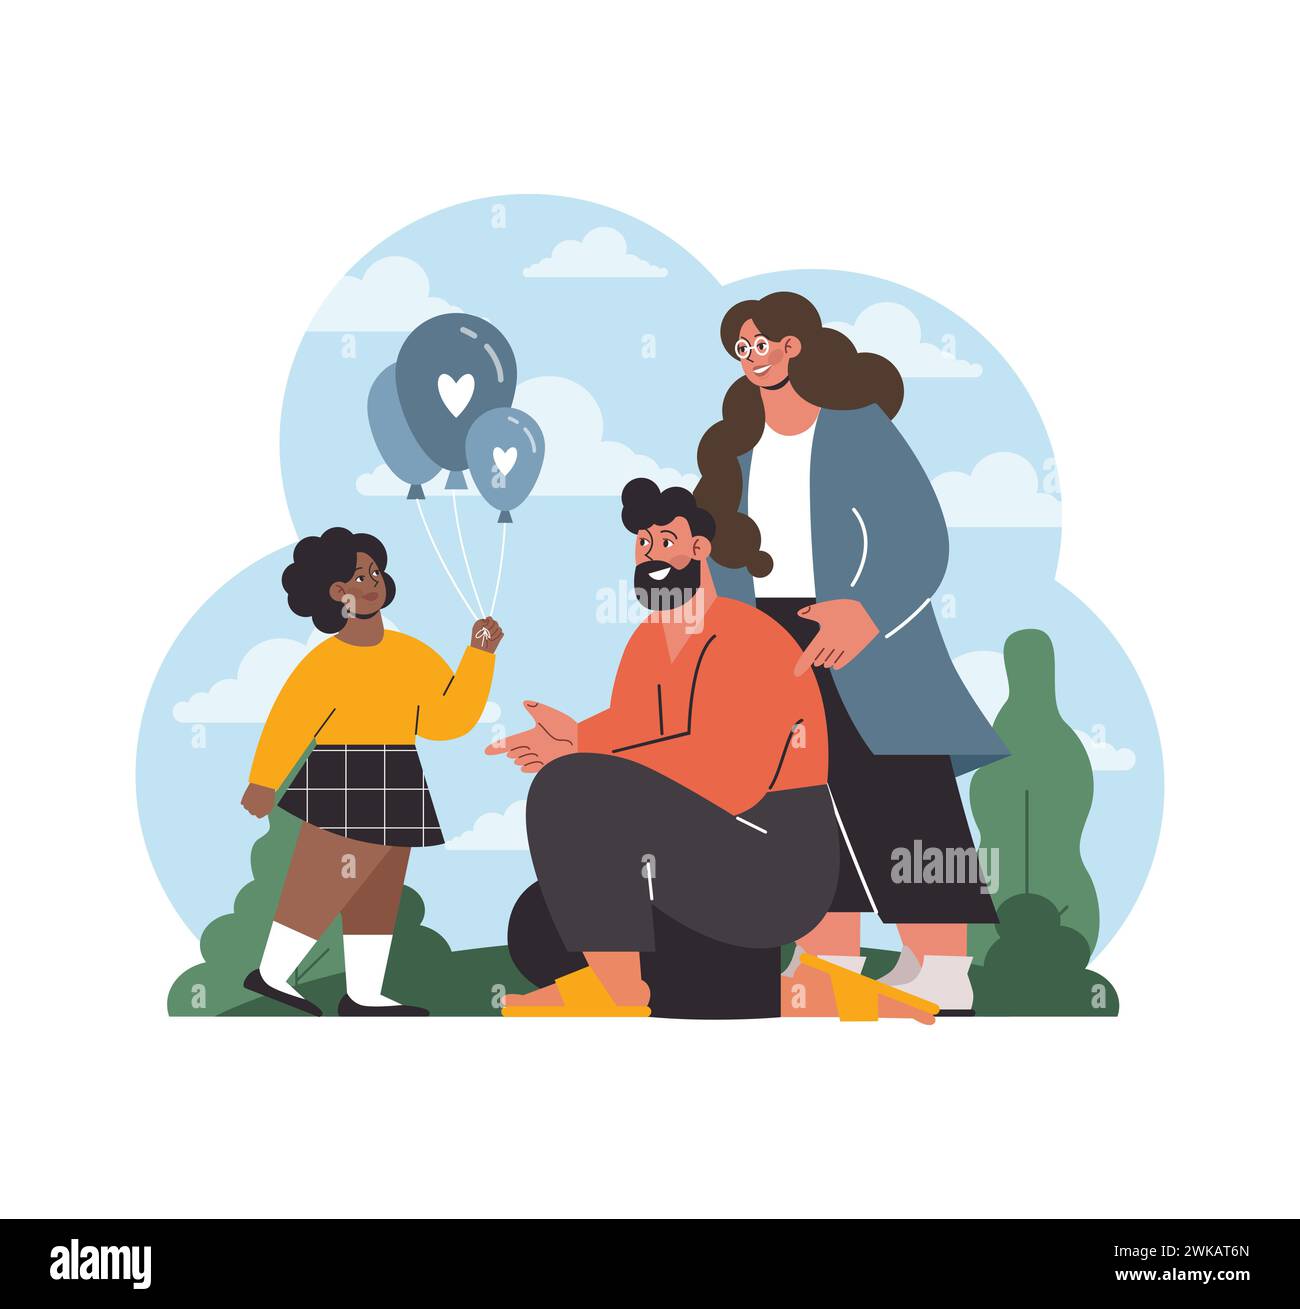 Harmony in Diversity. A joyful blended family enjoys a peaceful moment outdoors, highlighting the bond and unity of diverse modern families. Child with balloons. Scenic backdrop. Flat vector. Stock Vector